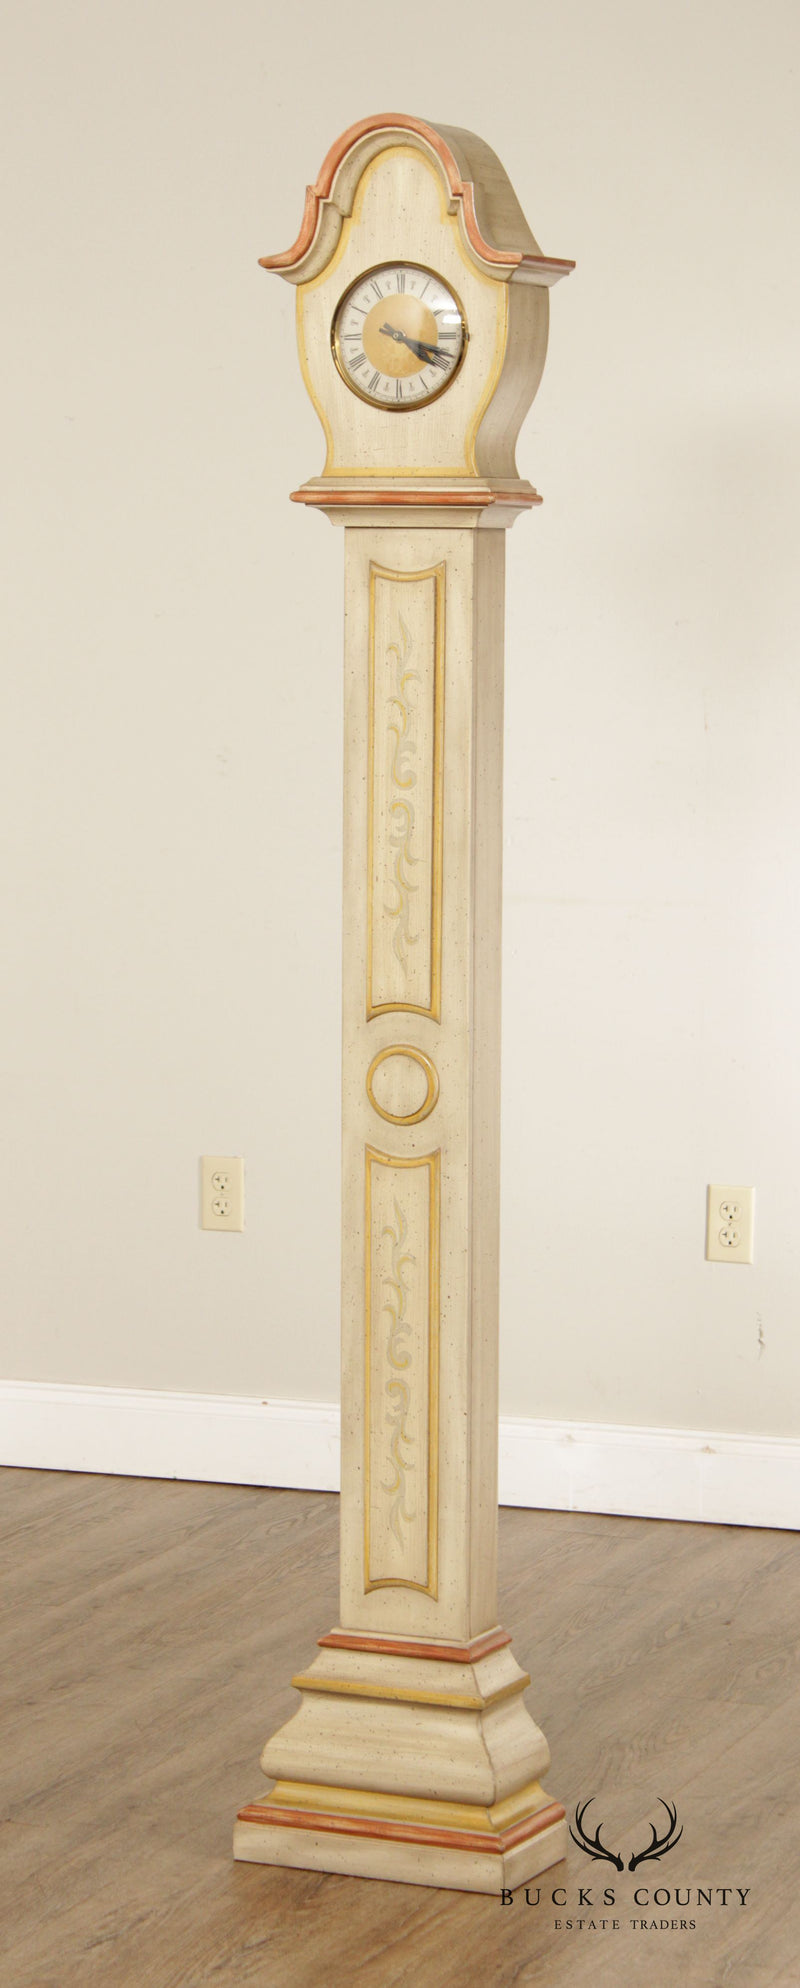 Trend Clock by Sligh Painted Decorated Narrow, Tall Grandmother Clock